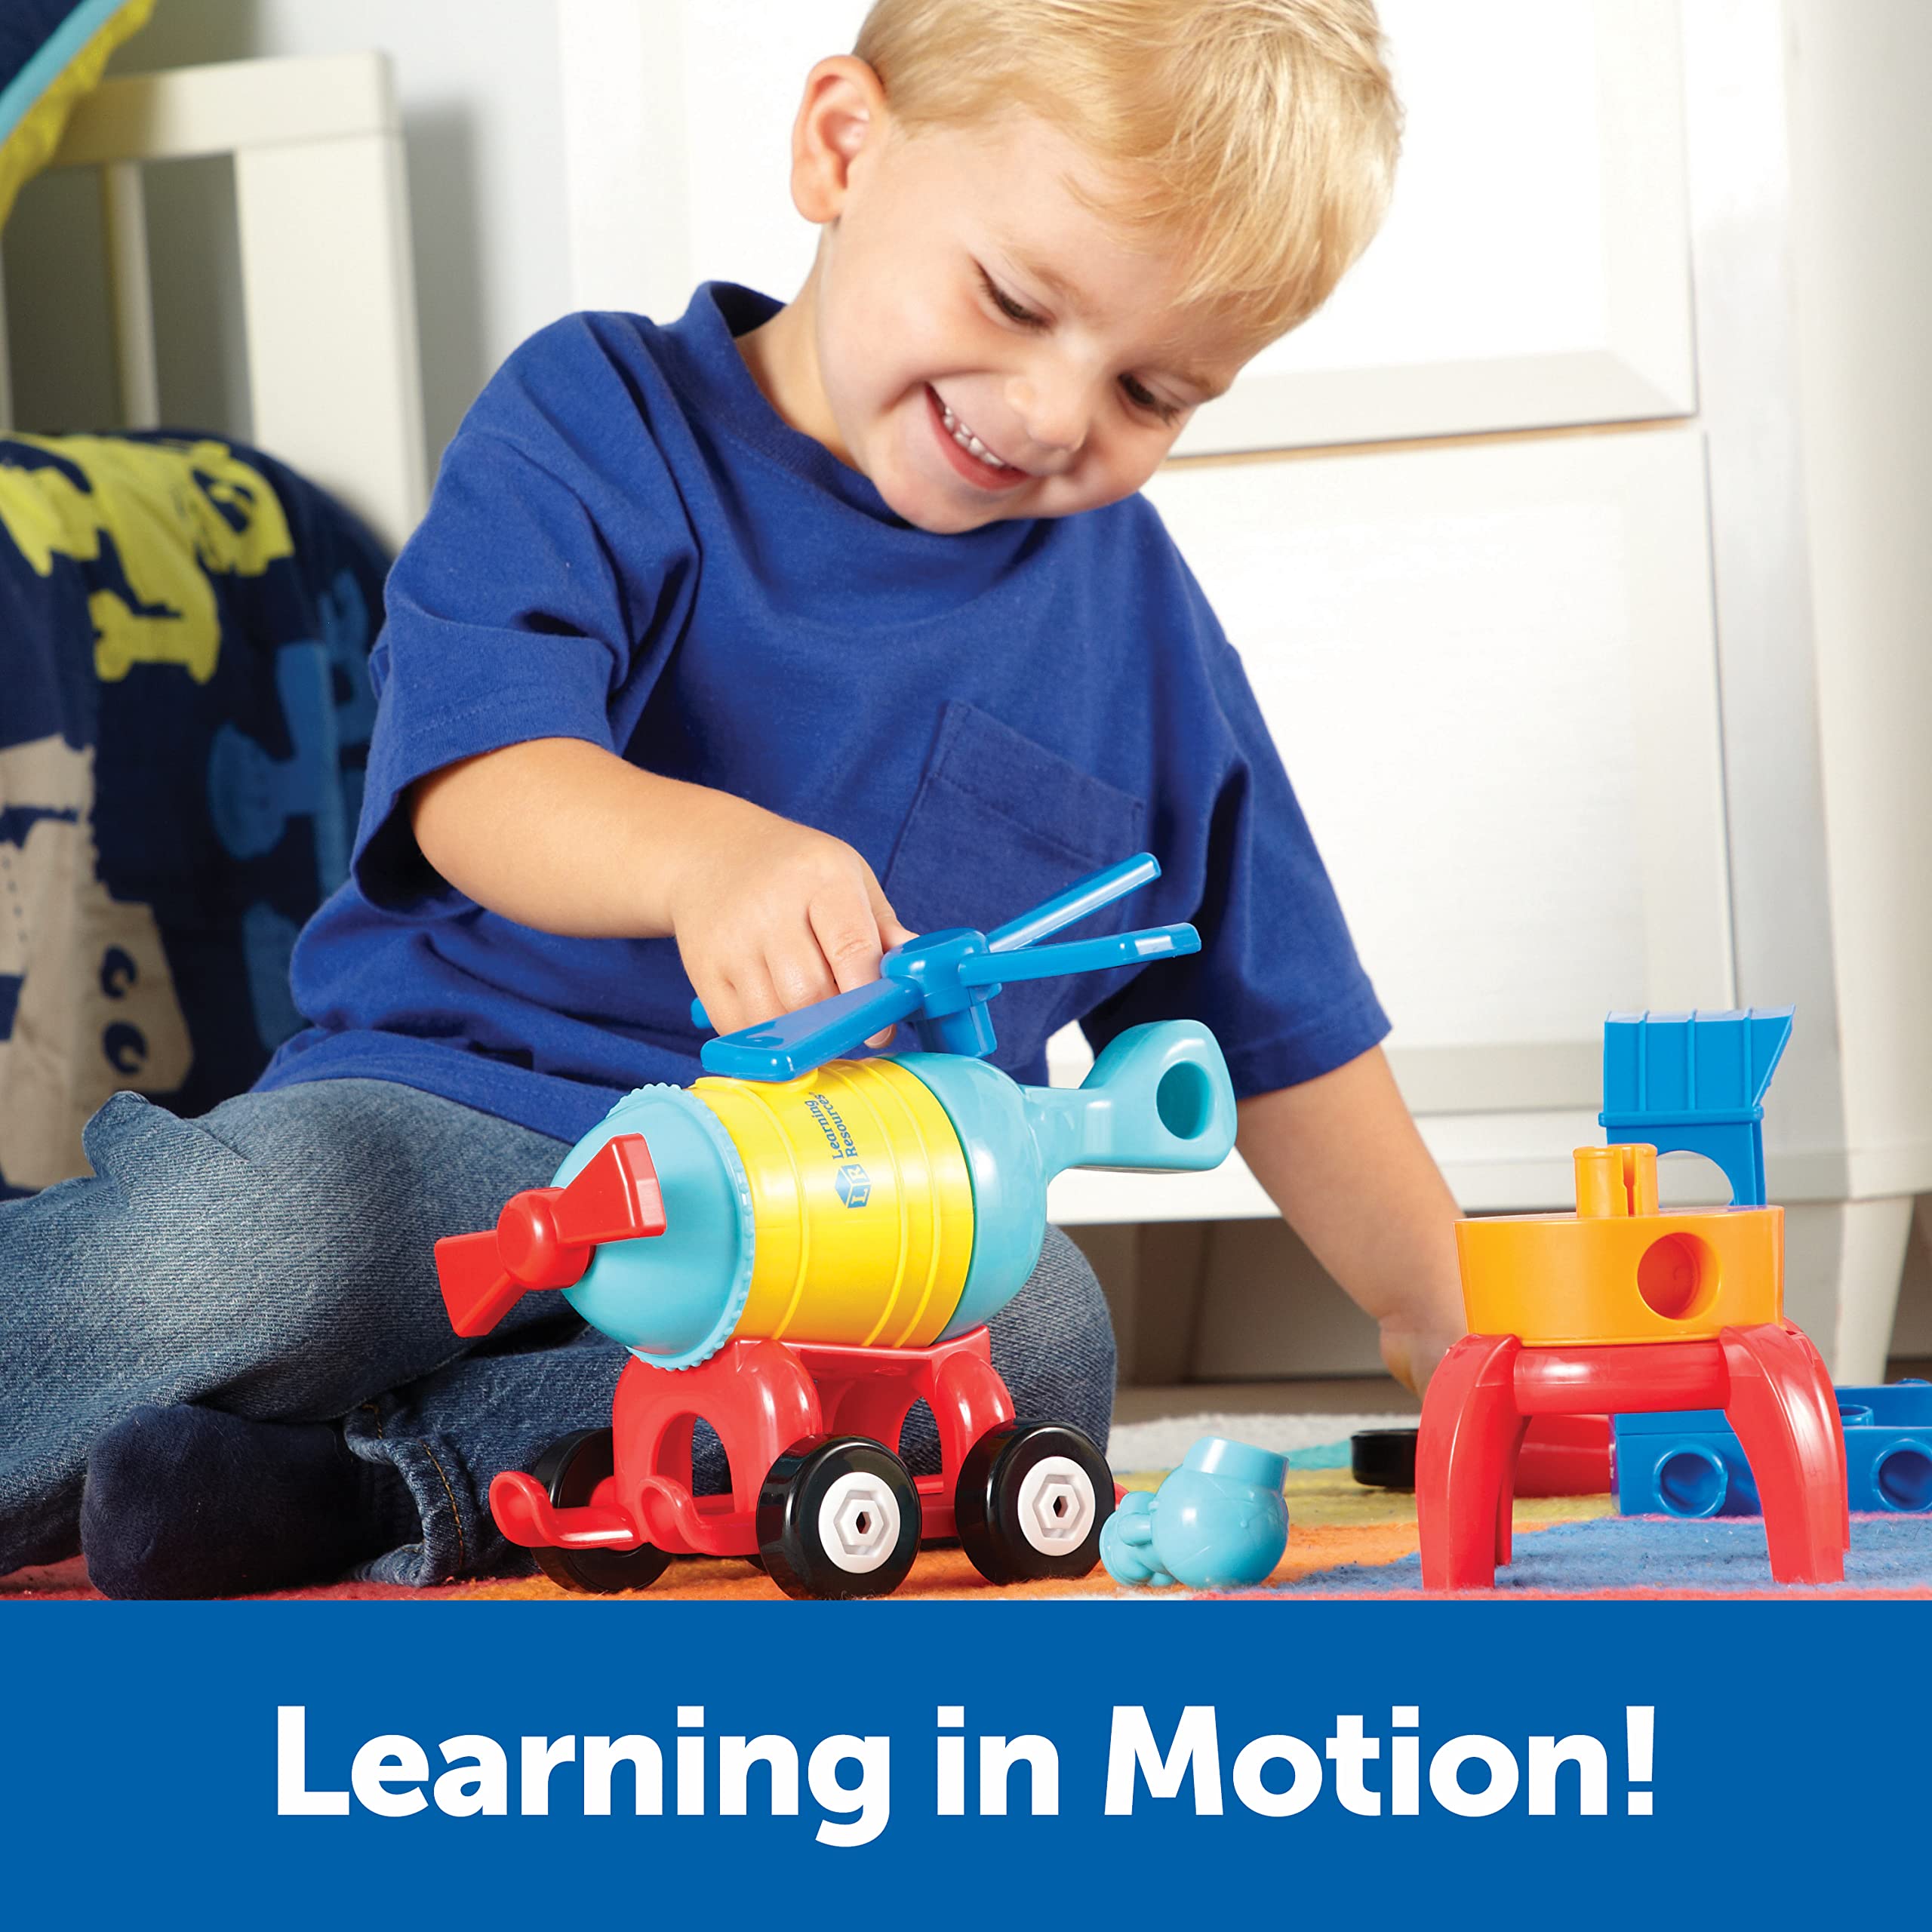 Learning Resources 1-2-3 Build It! Rocket-Train-Helicopter - 17 Pieces, Ages 2+ Toddler Learning Toys, Encourages Creative Thinking, Toddler Building Toy, STEM Toys, Early Engineering Toys